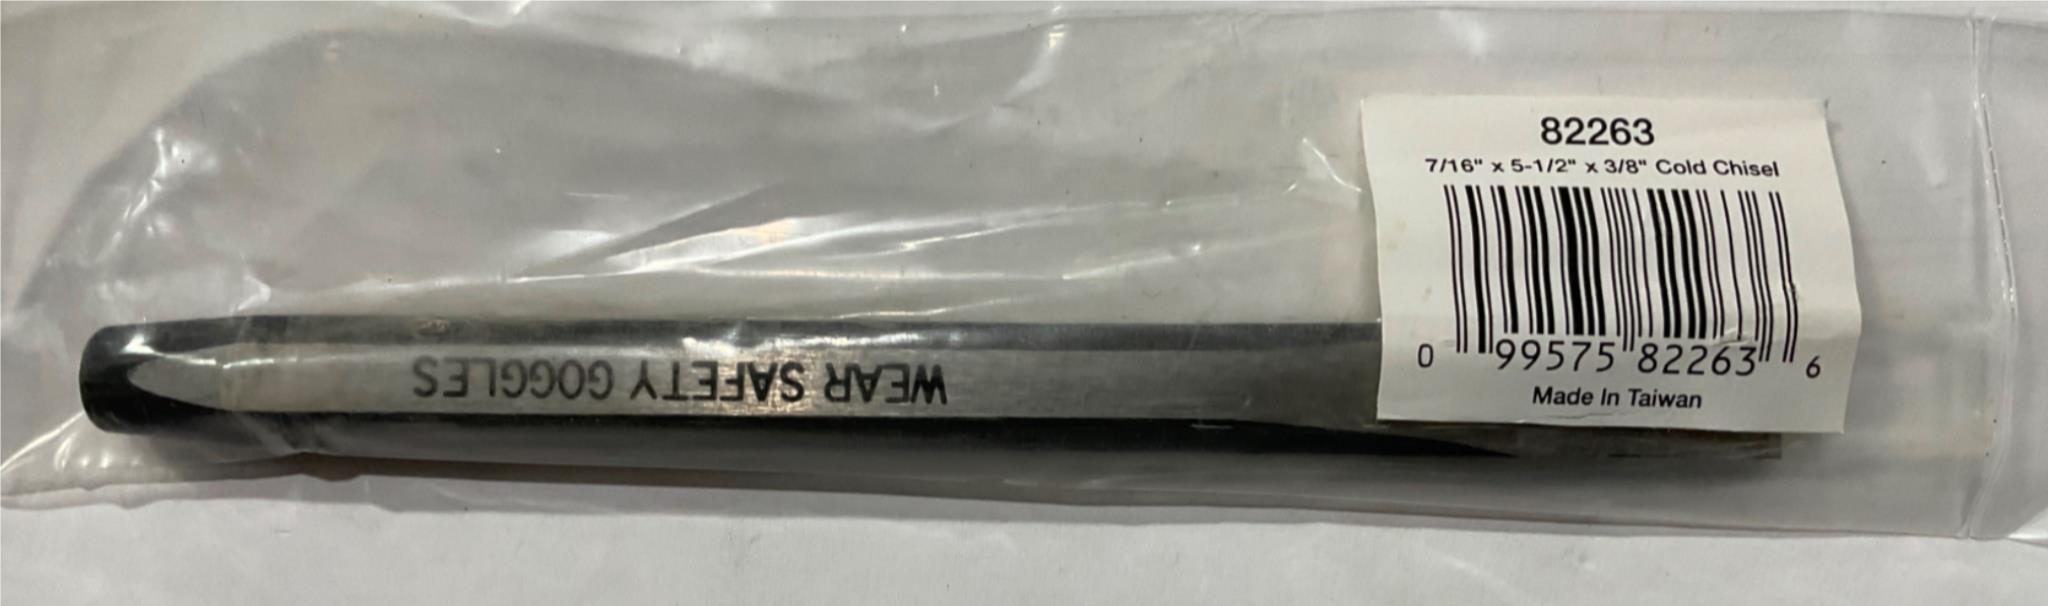 GEARWRENCH 82263 7/16" x 5-1/2" x 3/8" Cold Chisel